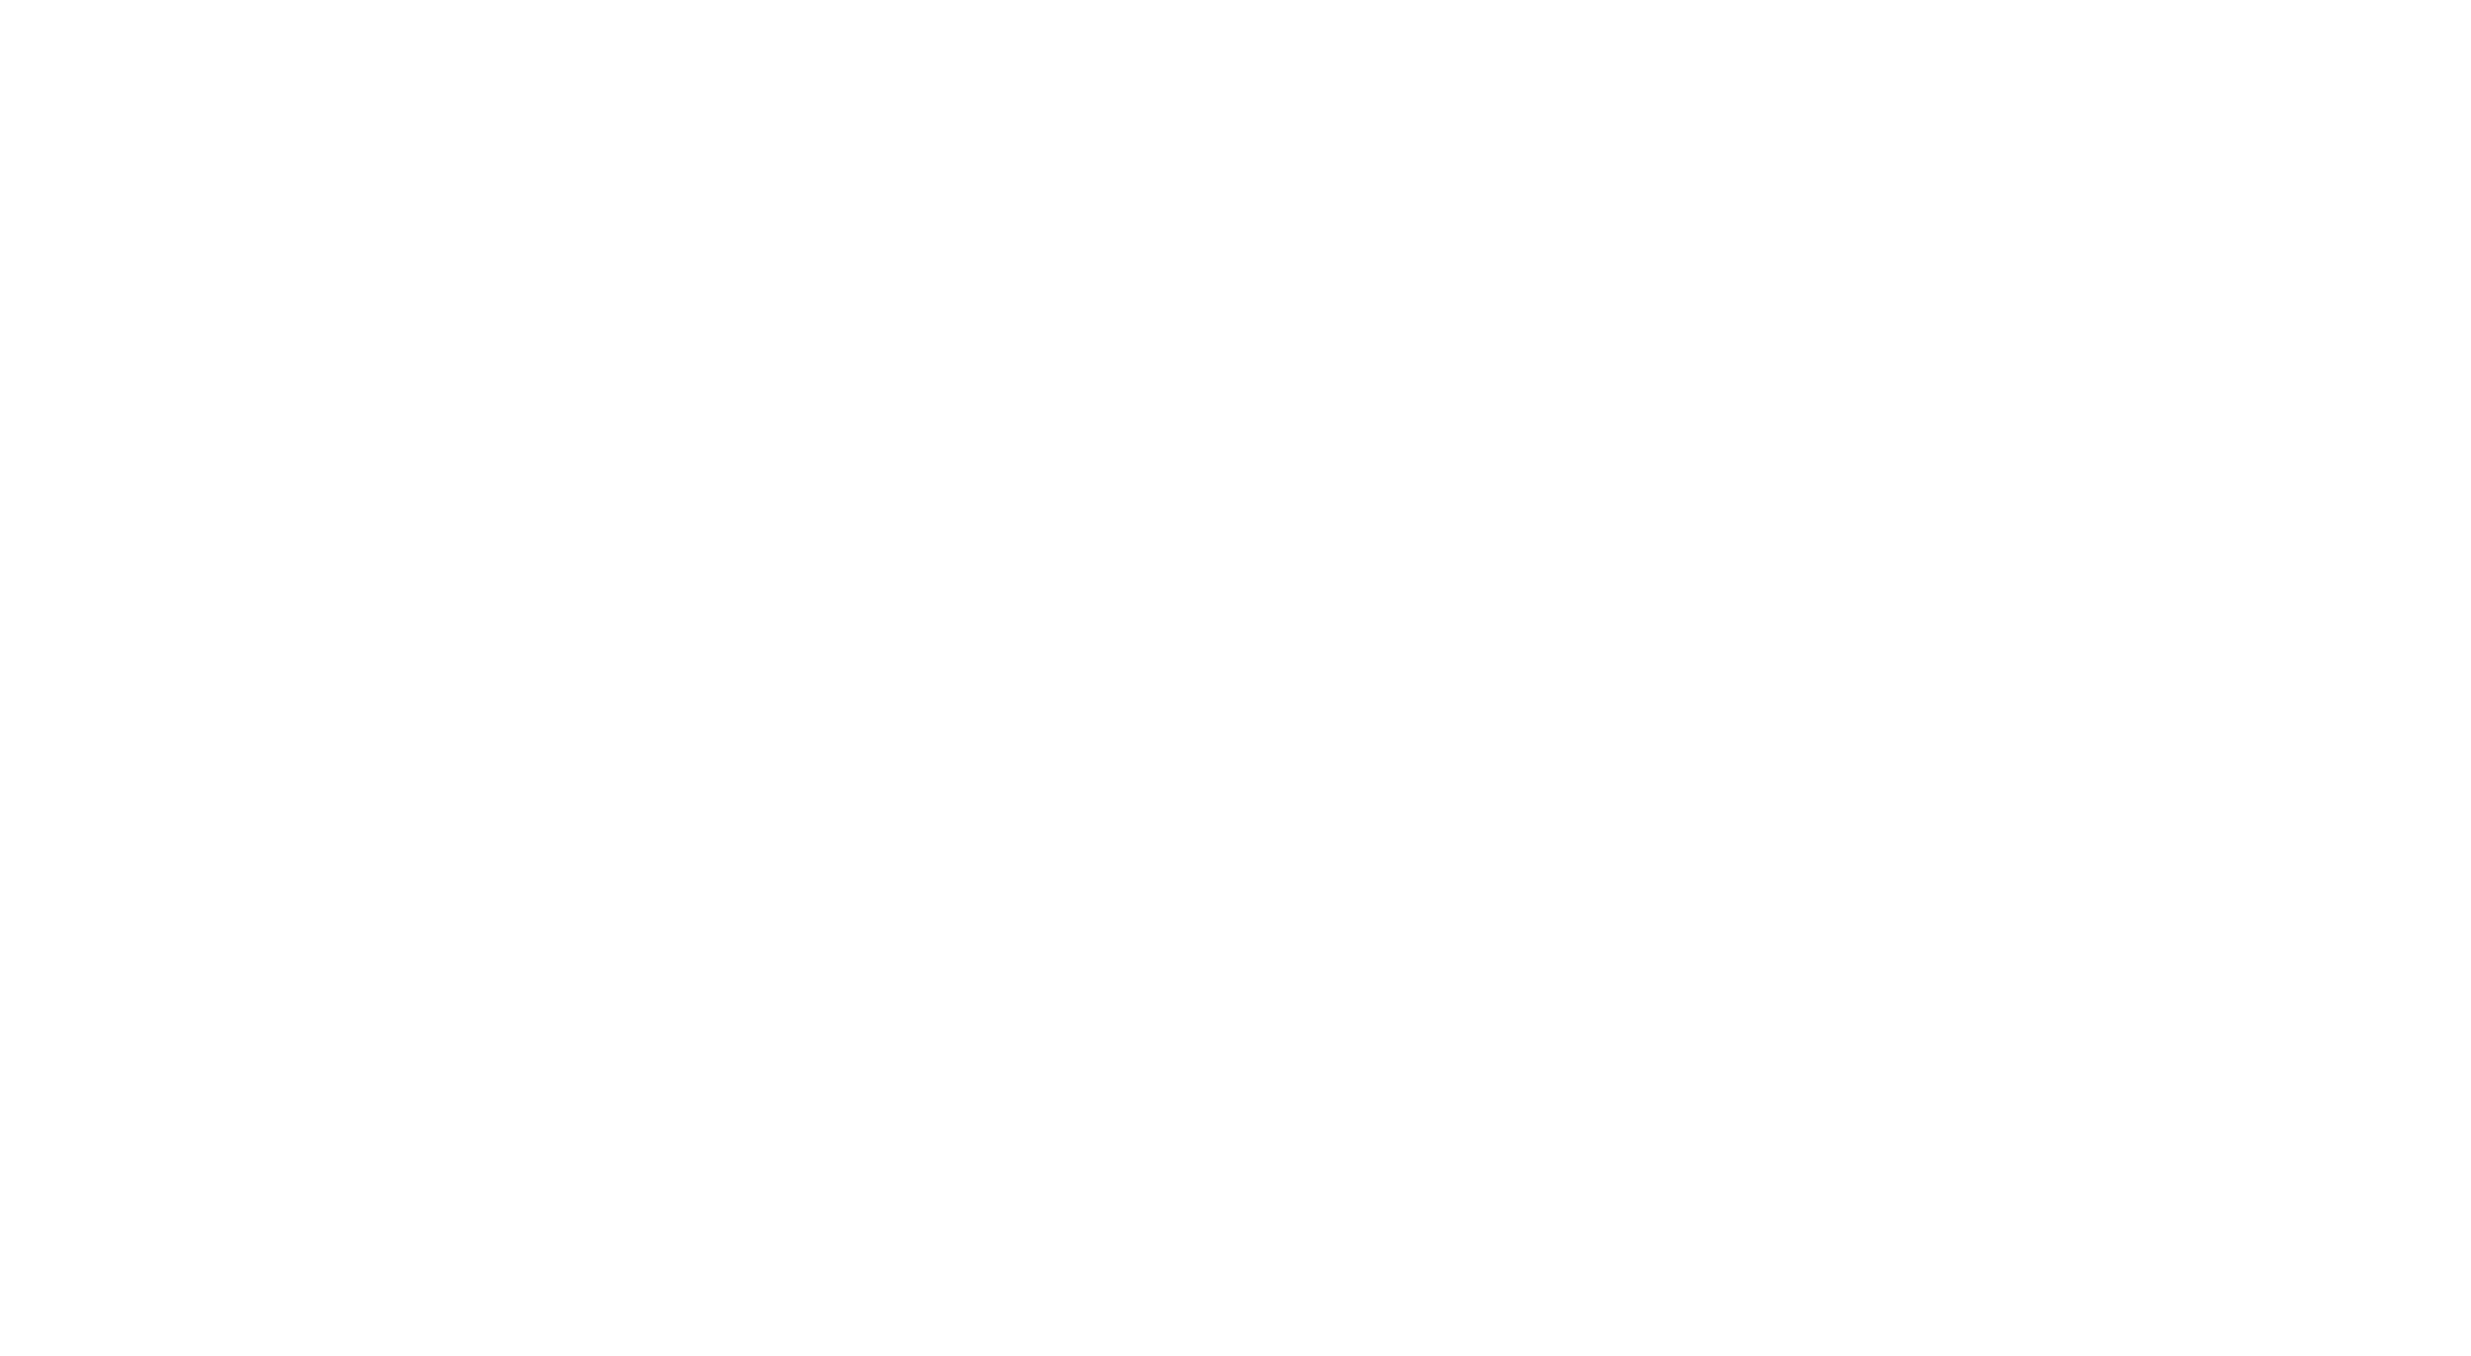 Bendy and the Dark Revival - SteamGridDB